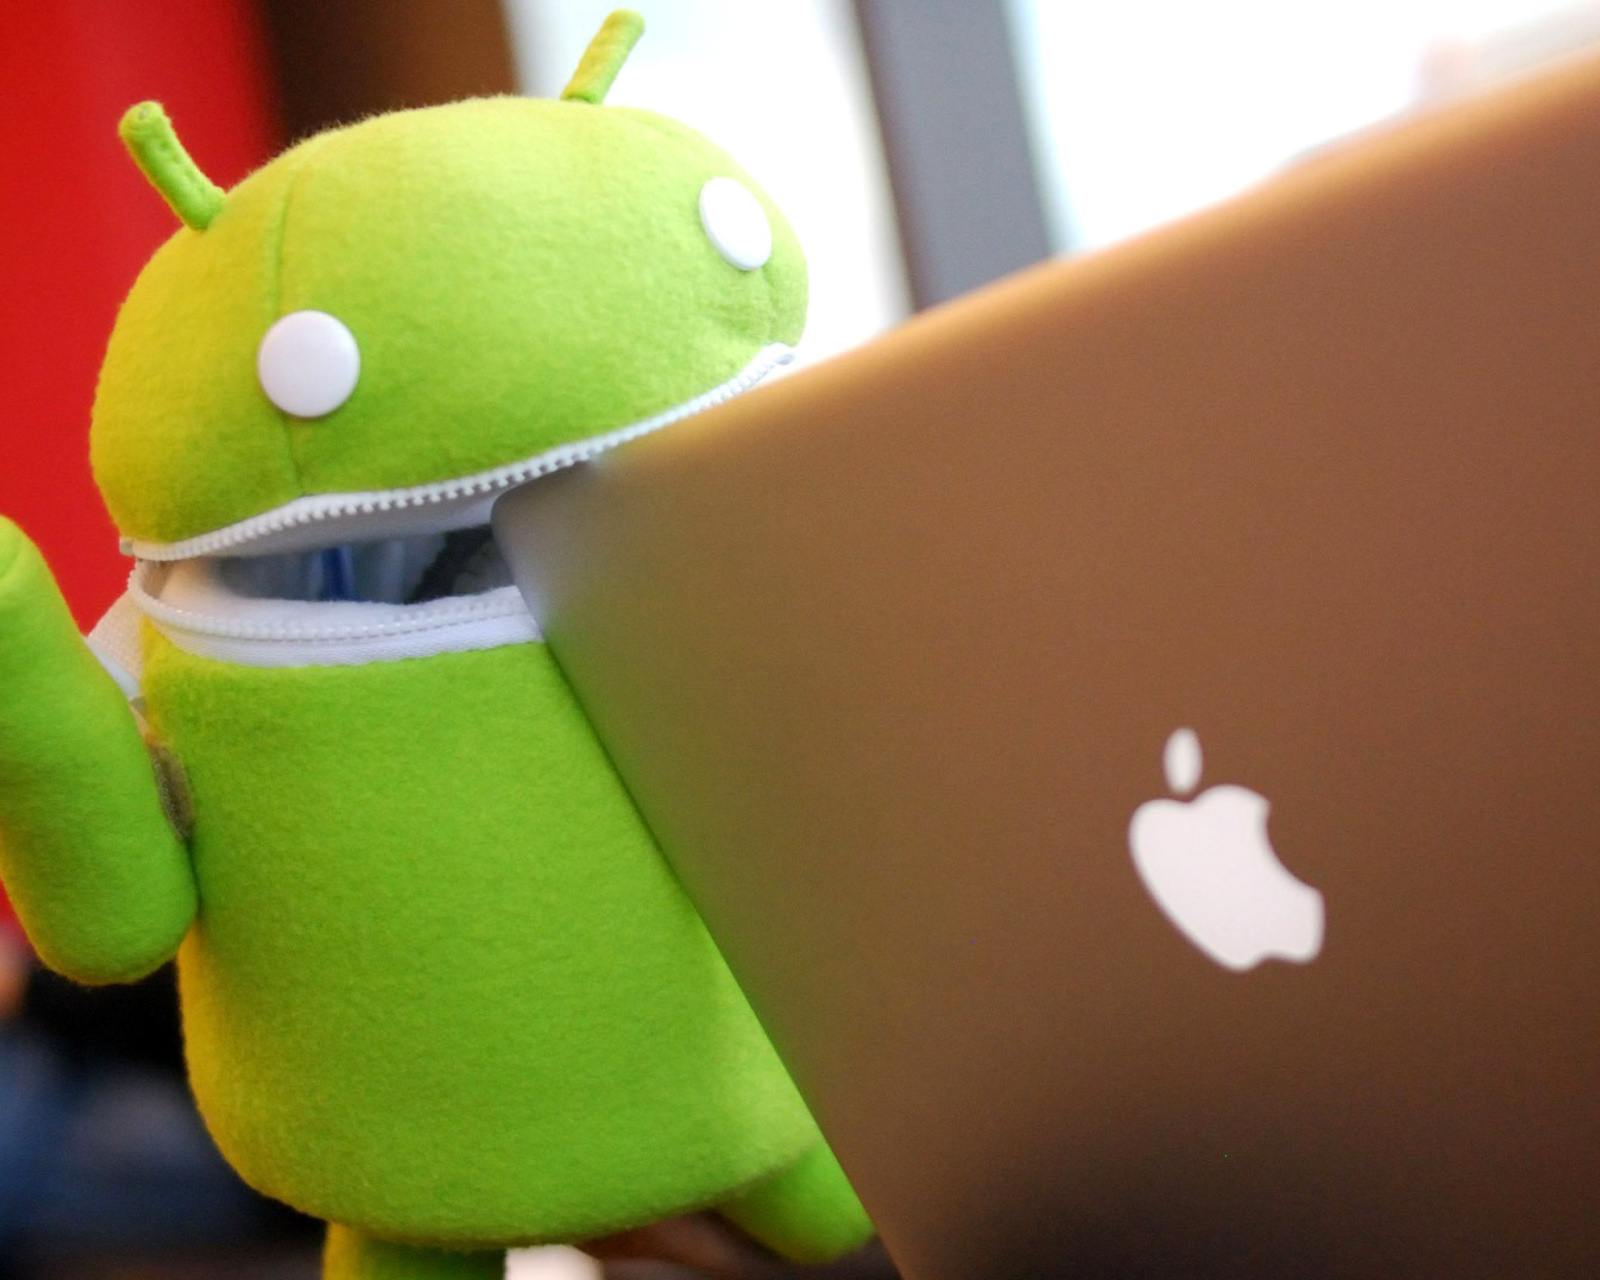 Das Android Robot and Apple MacBook Air Laptop Wallpaper 1600x1280